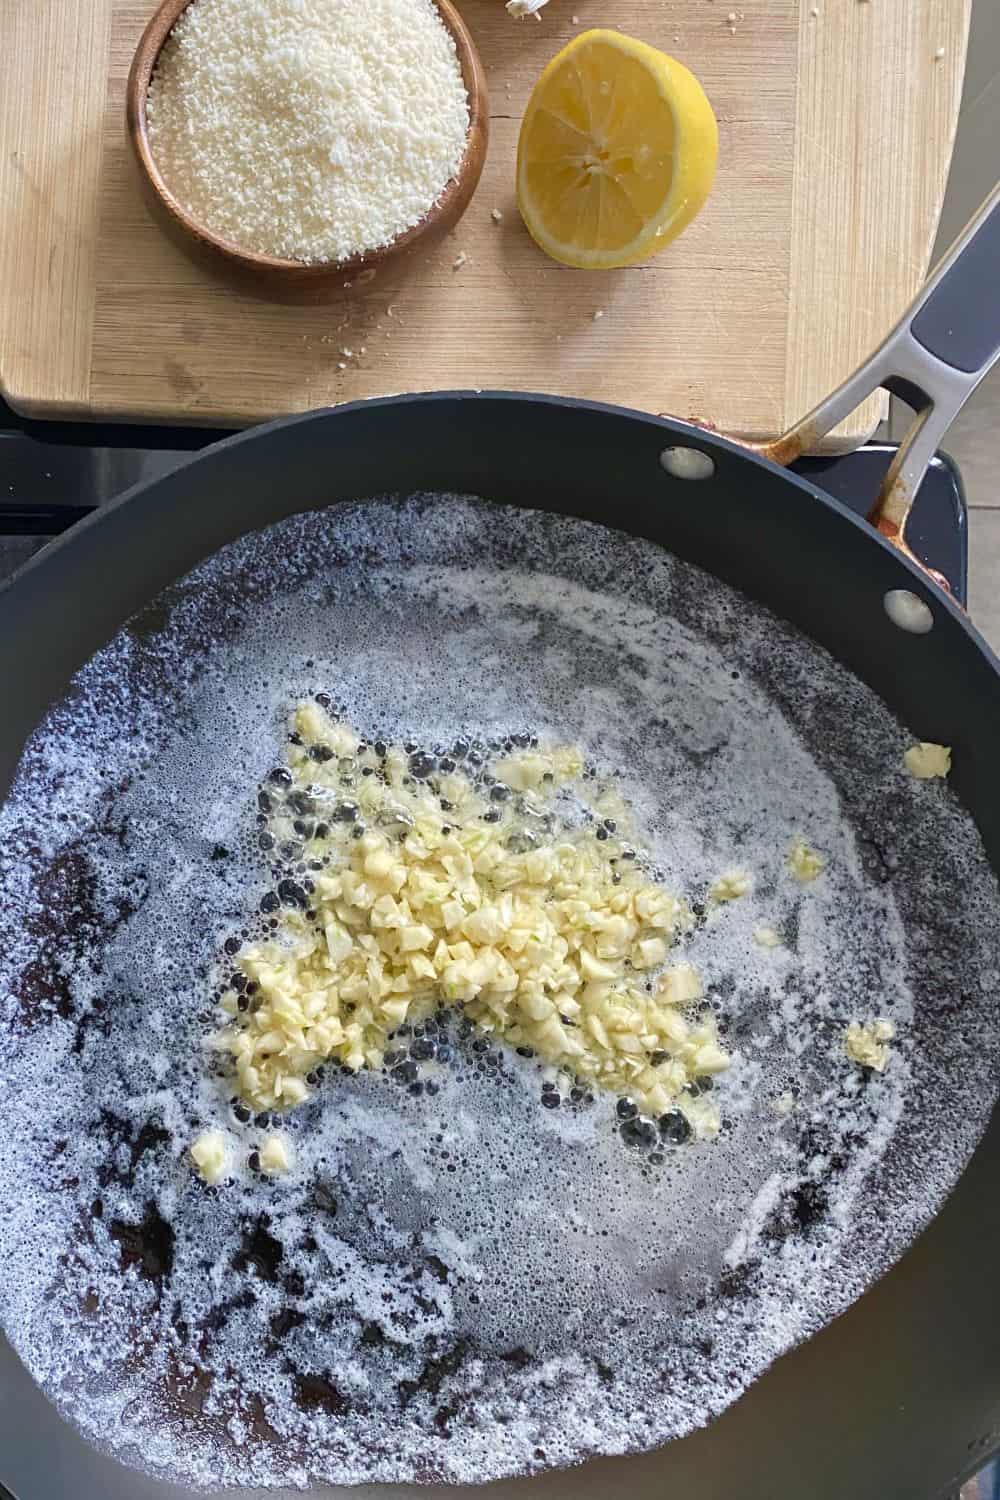 melted butter, olive oil and garlic in a sauté pan